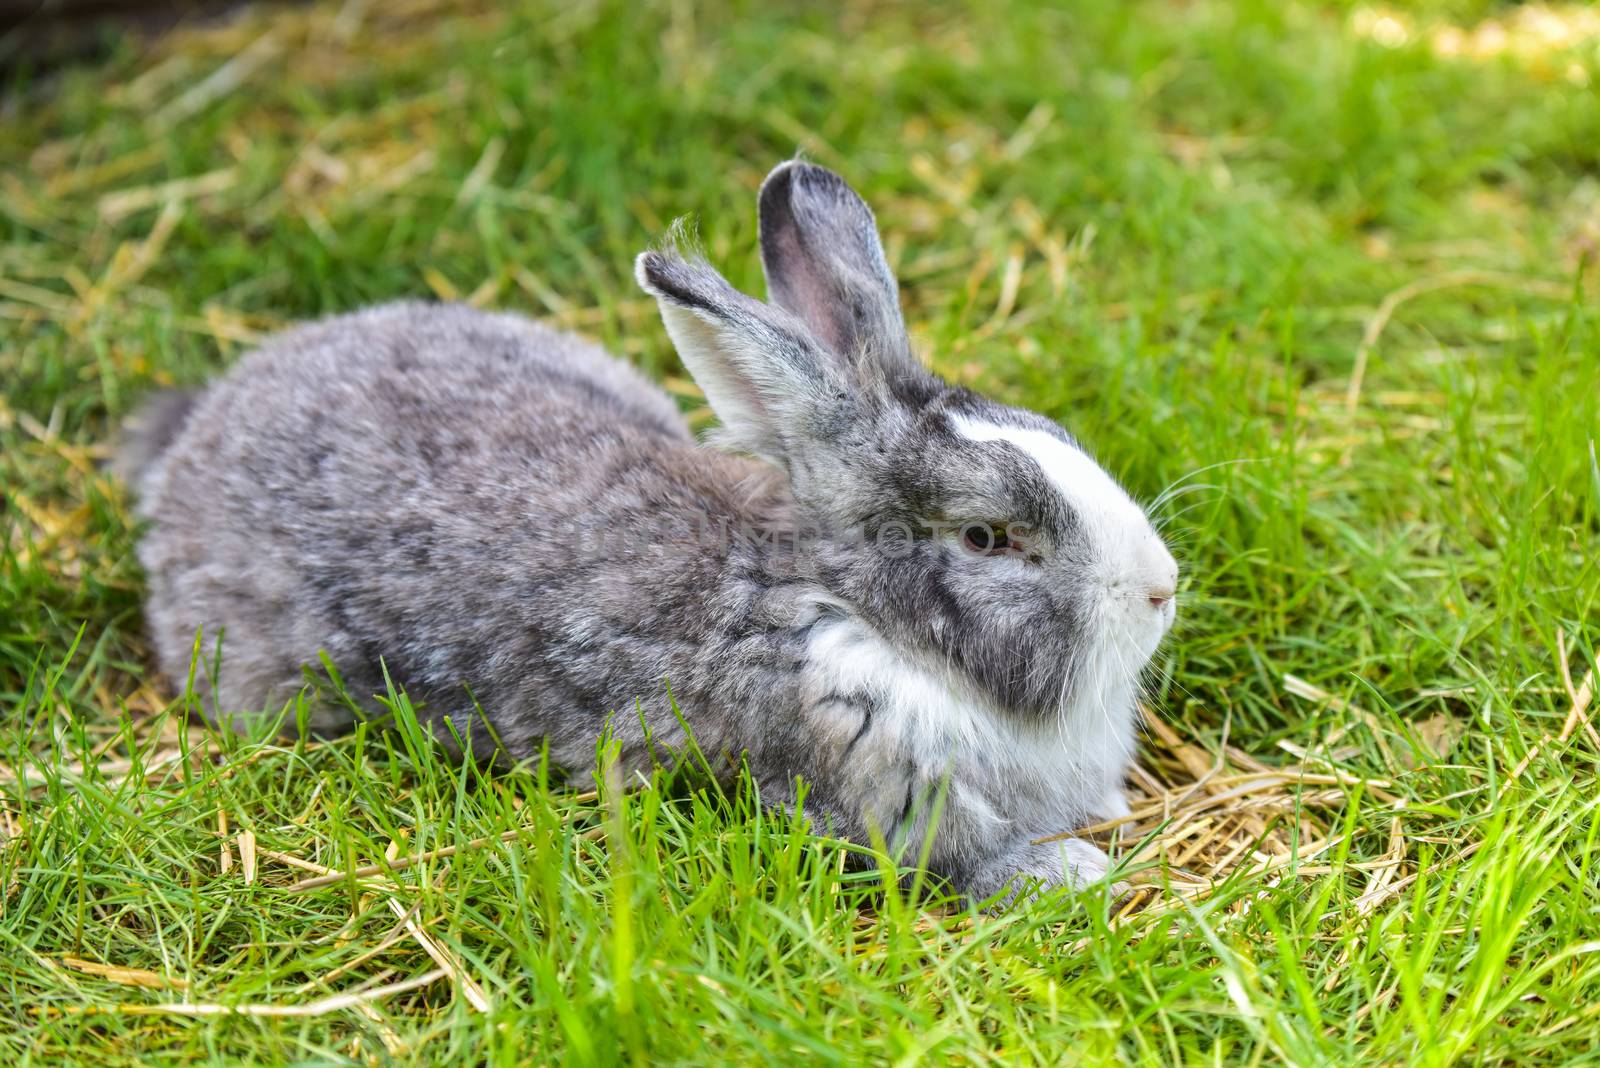 Gray bunny sitting on green grass. Large adult grey hare with long ears in full growth on green grass. Rabbit eating on a green grass lawn.